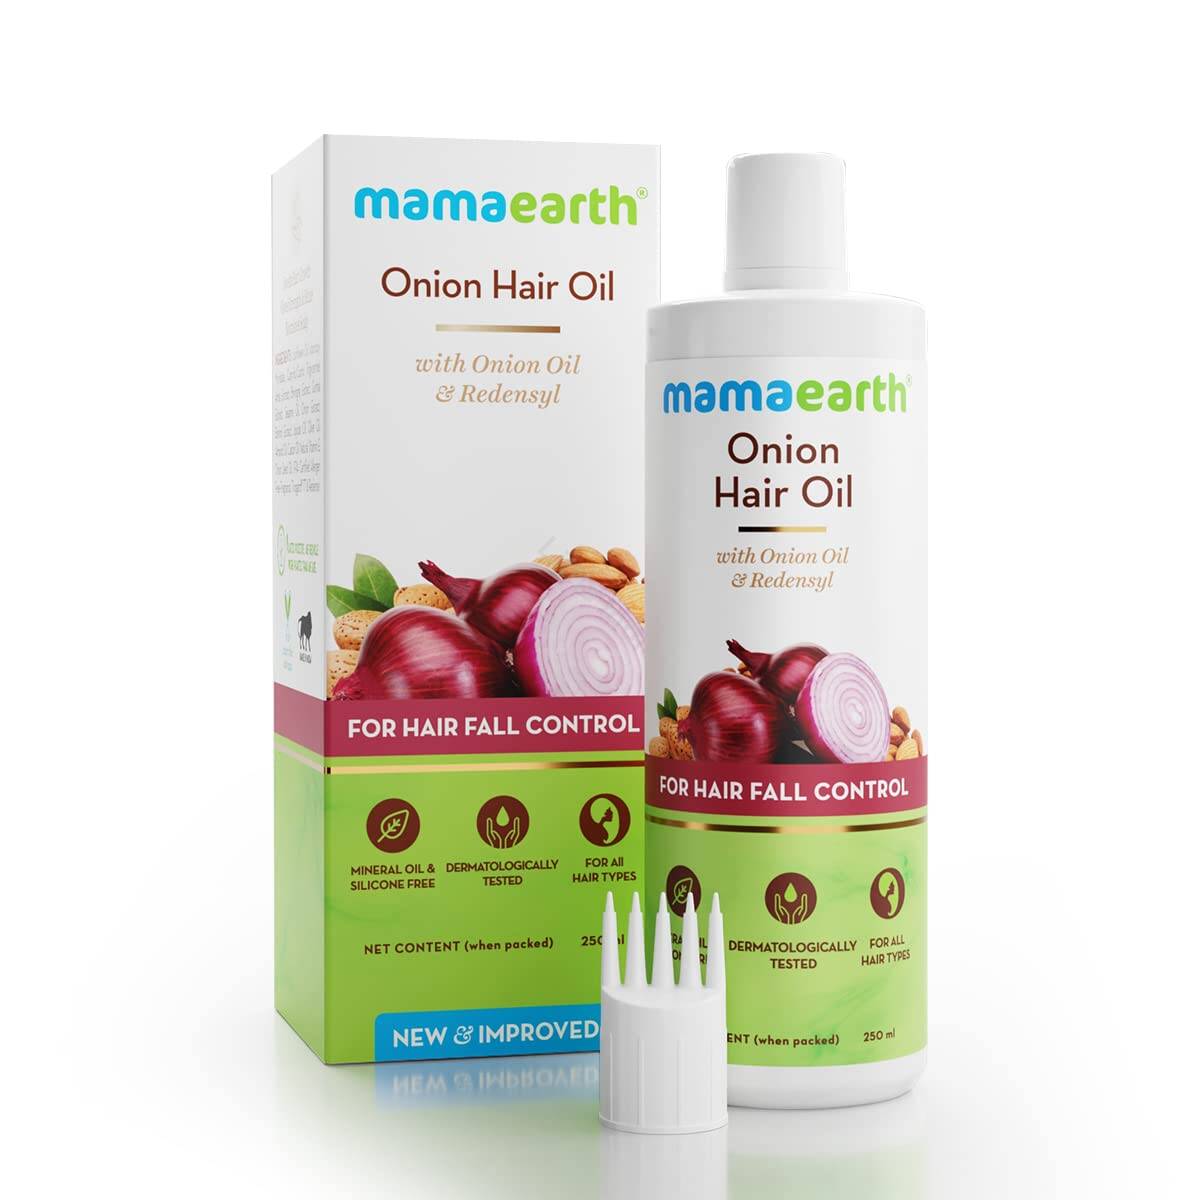 Mamaearth Onion Hair Oil Booster for Men with Onion and Redensyl for Hair  Fall Control- 30 ml